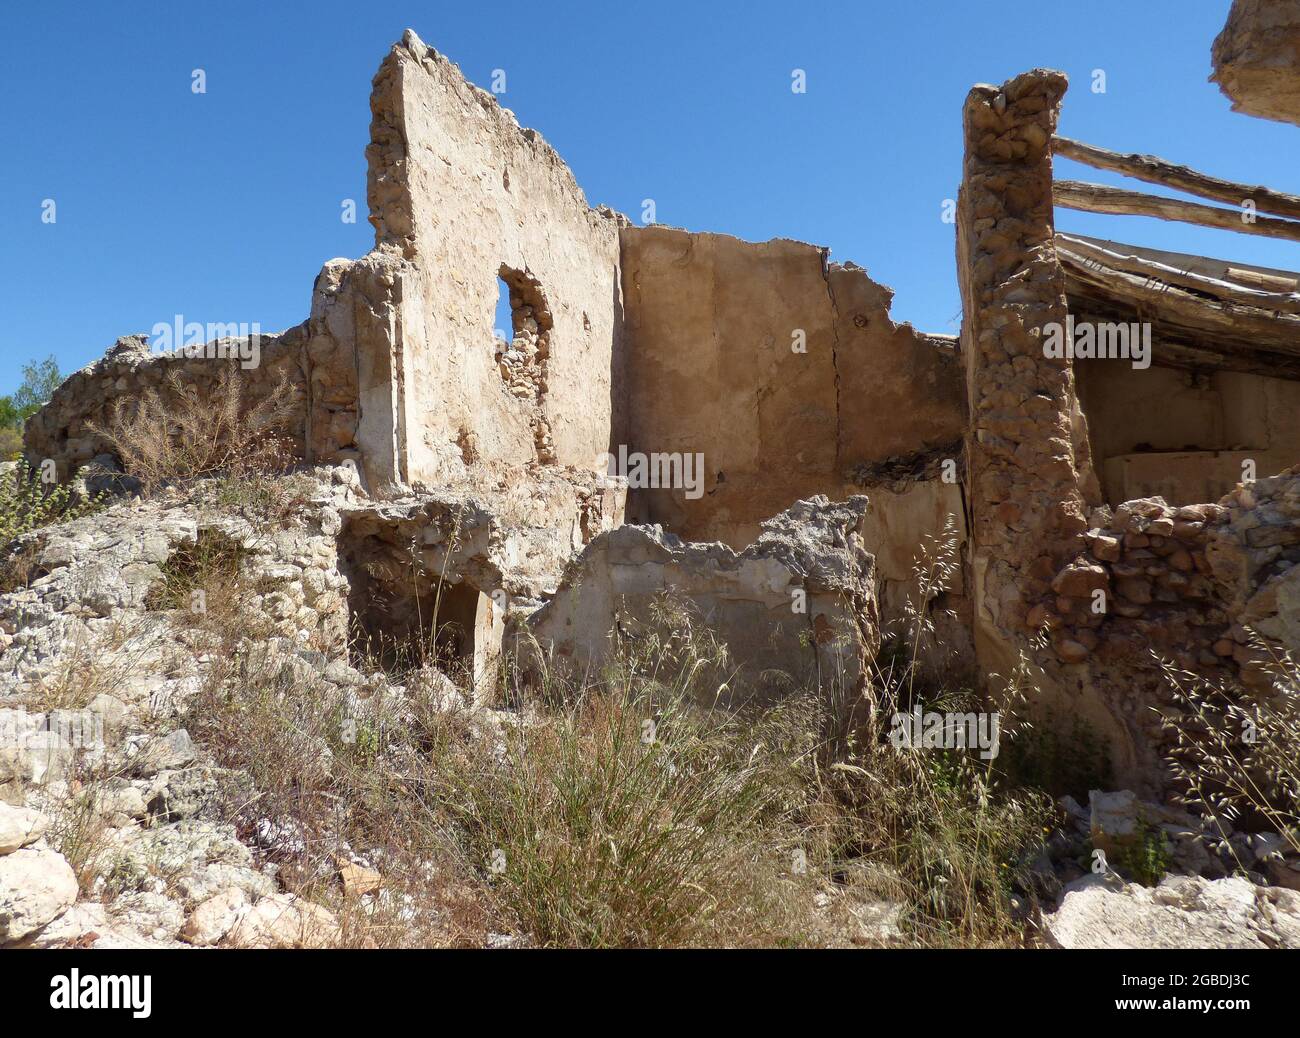 A completely dilapidated stone house in the Spanish sunshine. Nature takes over. A ruin in a very dry landscape. The sky is cloudless blue. Stock Photo